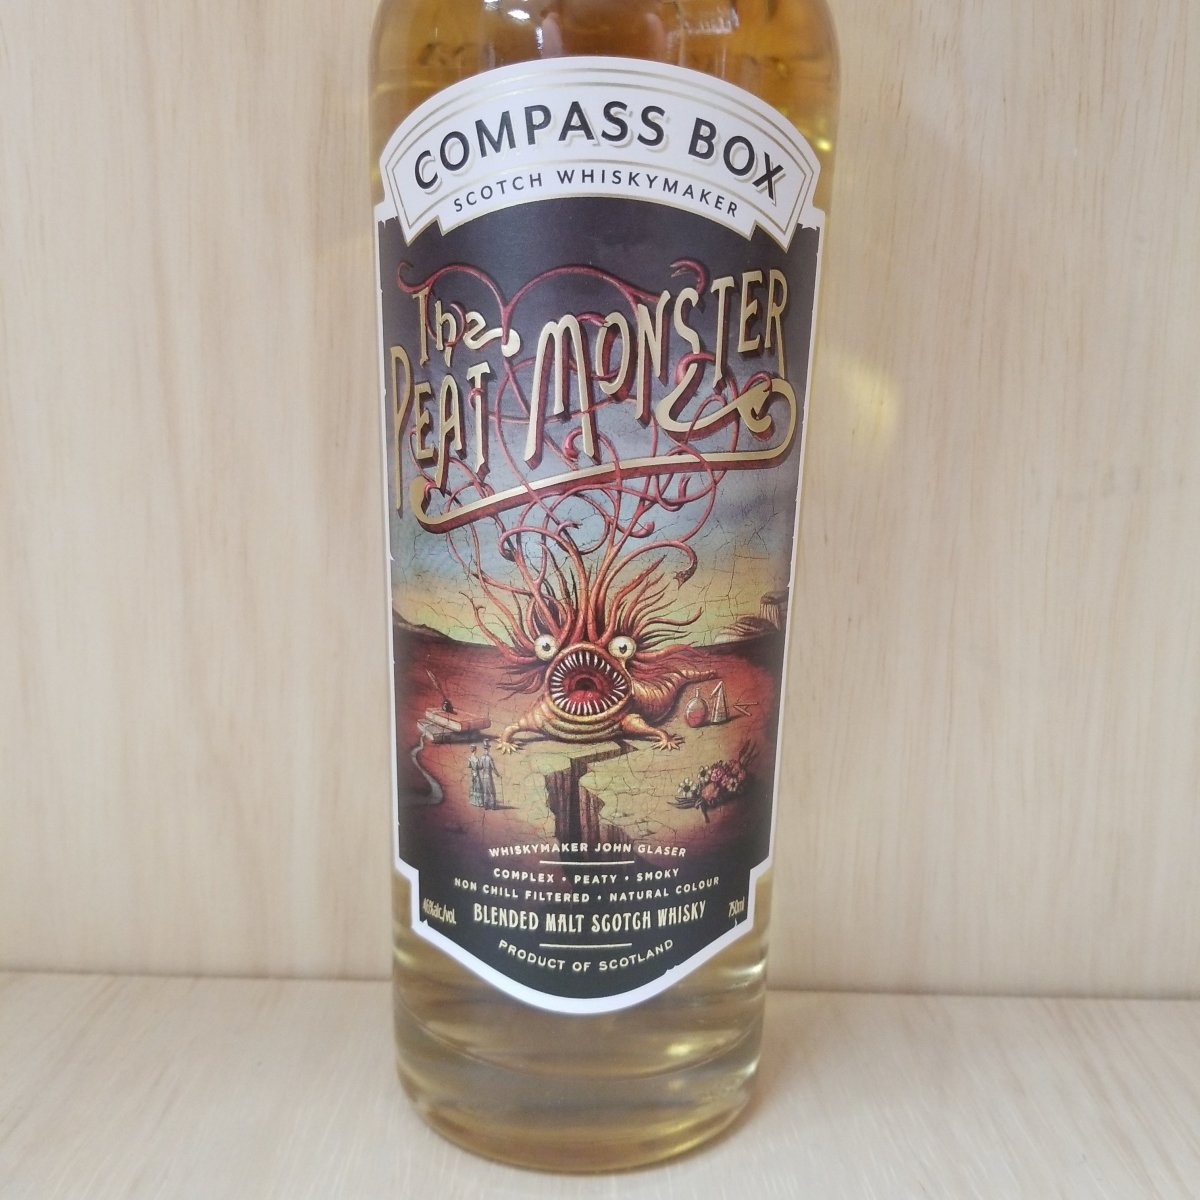 Compass Box Peat Monster Blended Scotch 750ml - Sip & Say